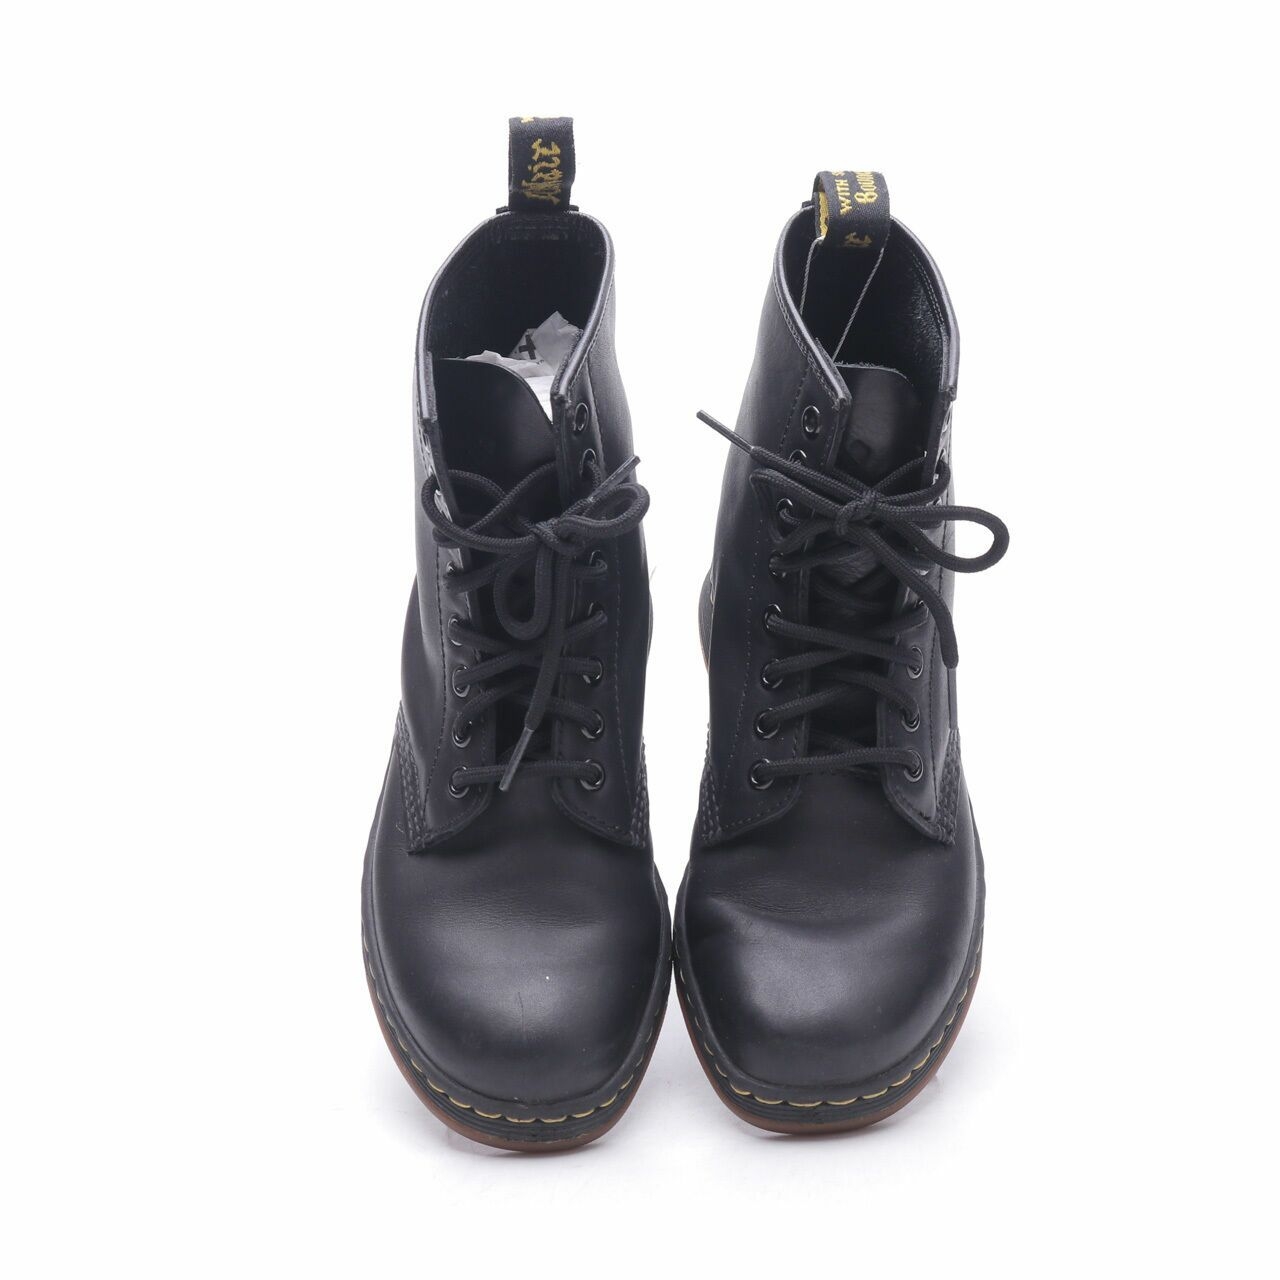 Dr Martens Newton Leather Black High Boots 